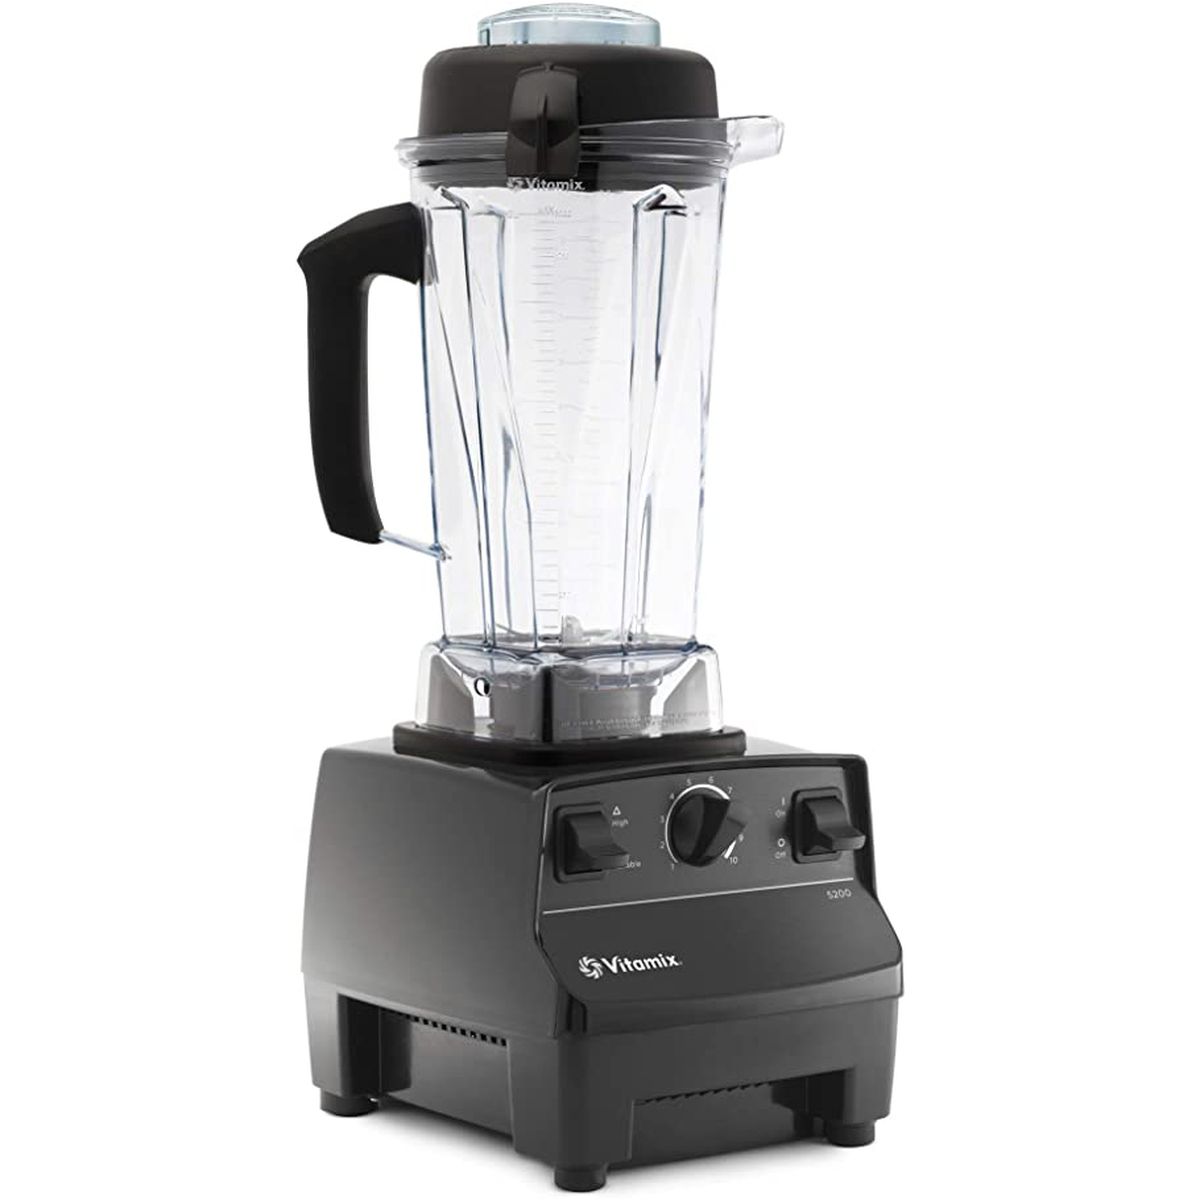 Product shot of a Vitamix blender on a white background.